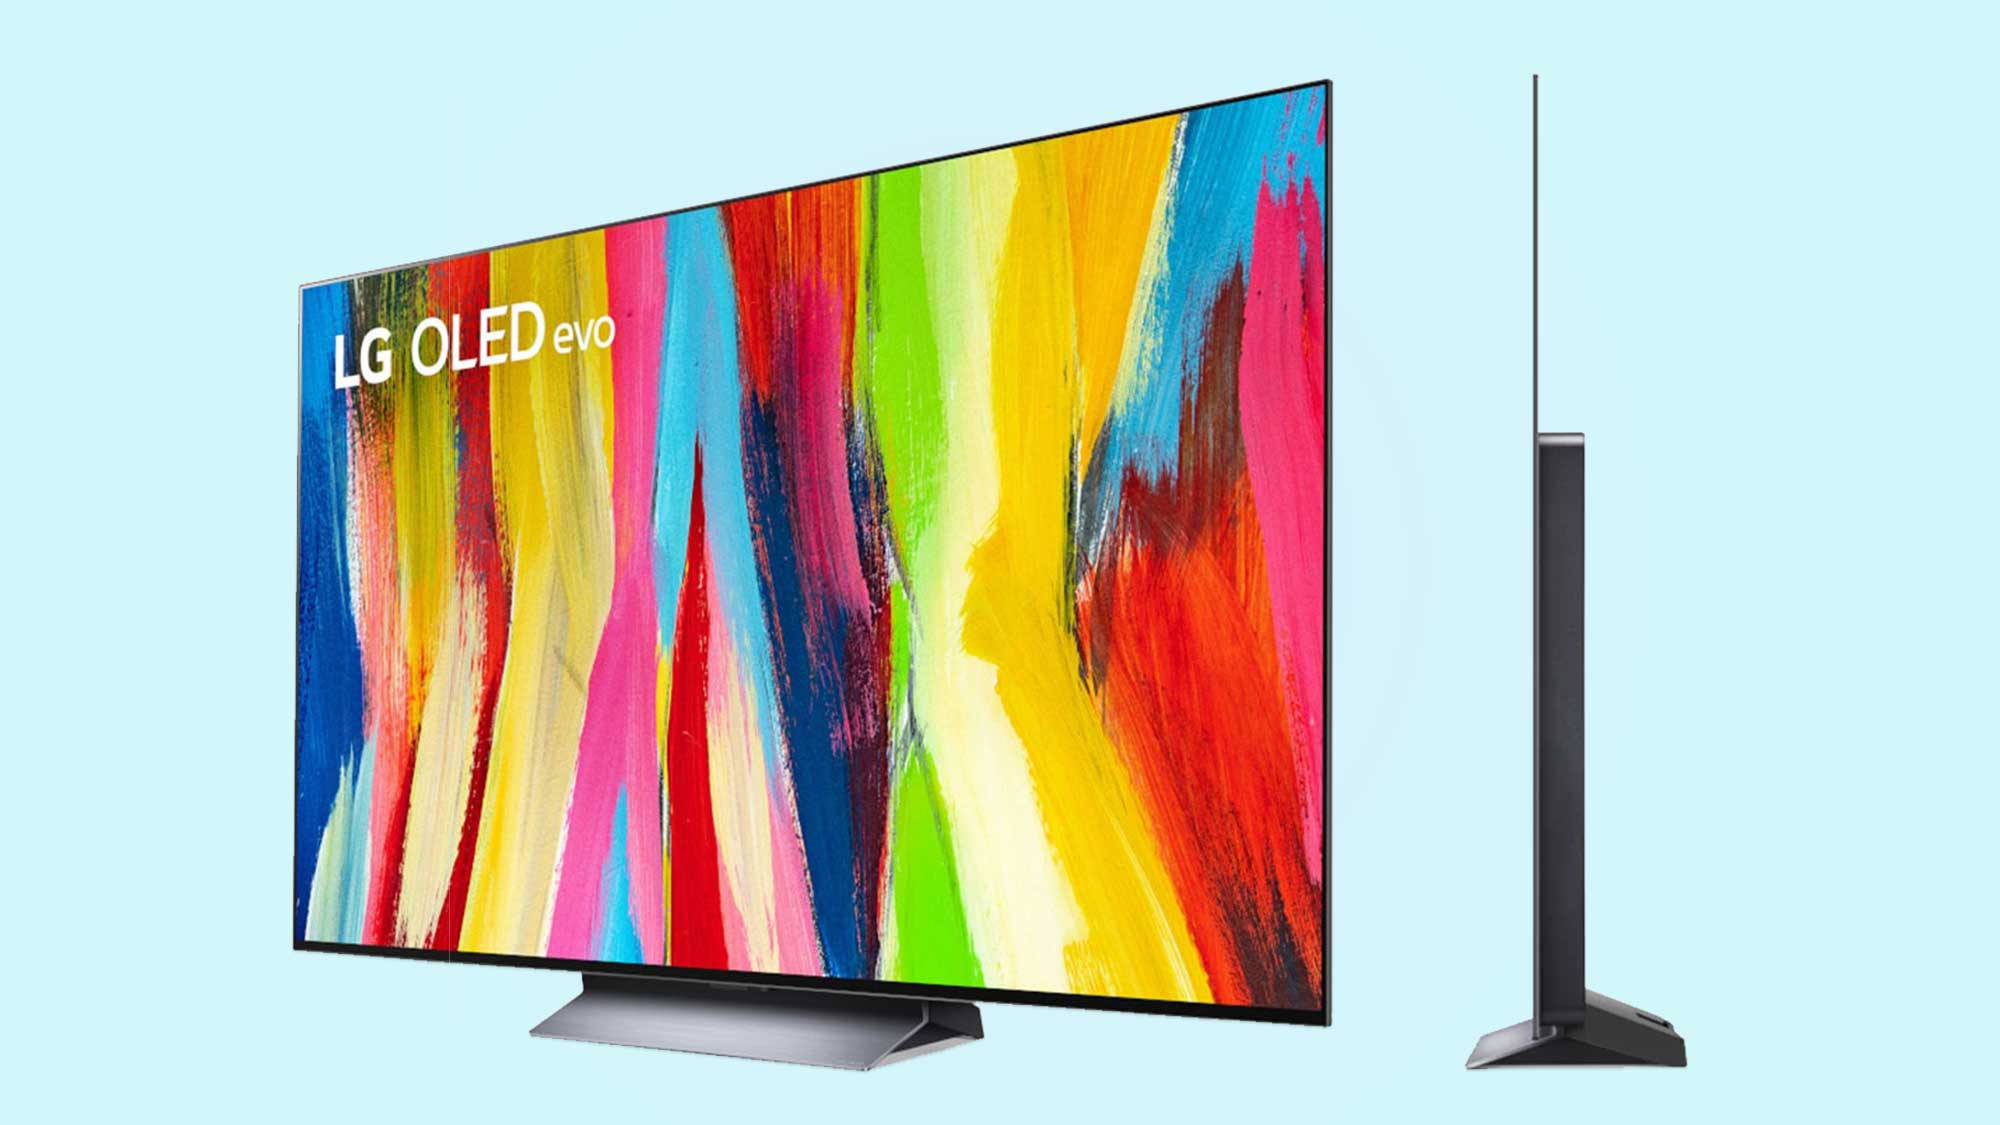 LG C2 OLED TV as seen from front and side